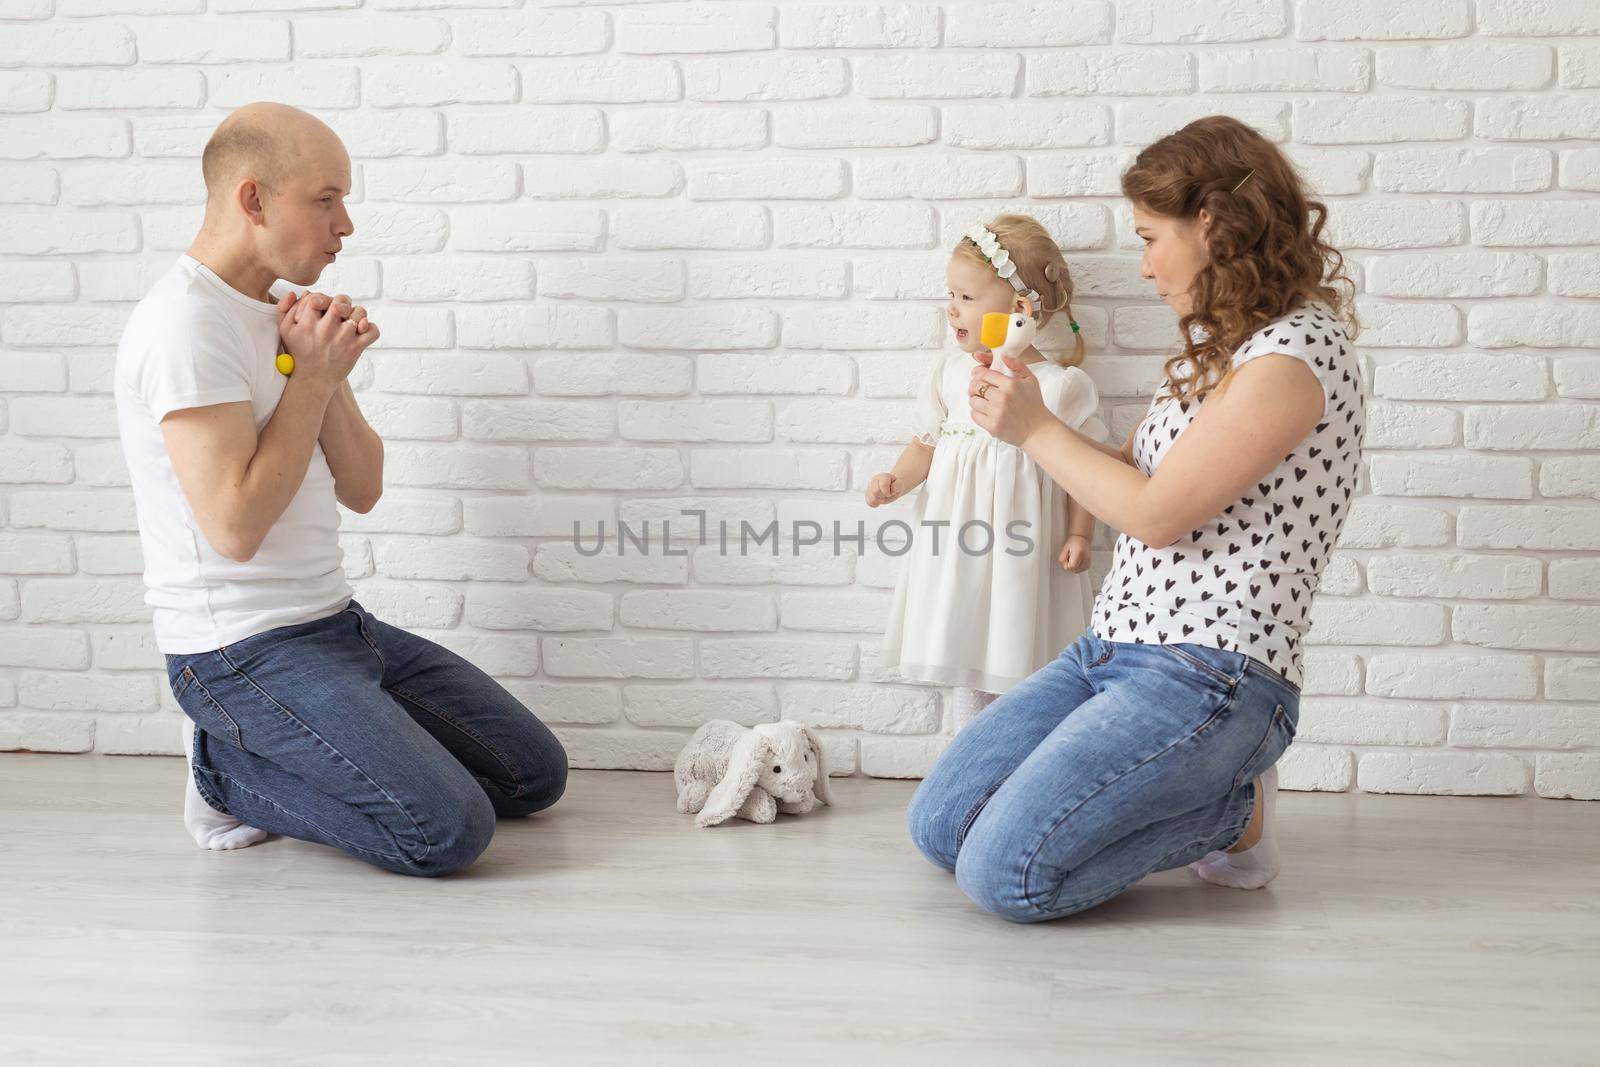 Baby child with hearing aids and cochlear implants plays with parents on floor. Deaf and rehabilitation and diversity concept by Satura86